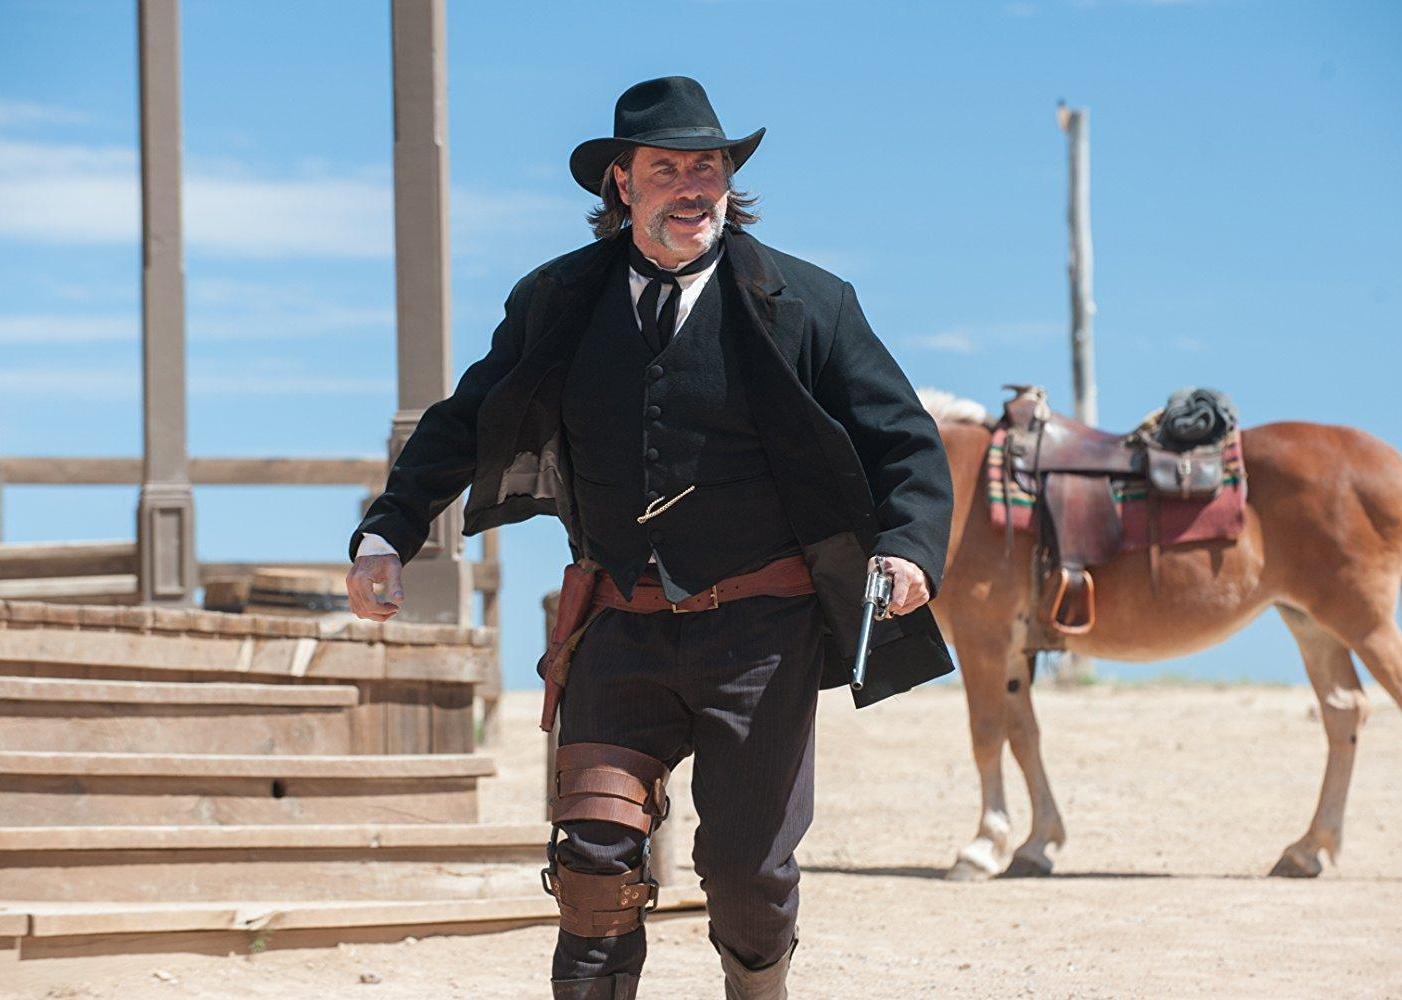 John Travolta in a black western suit and cowboy hat walking away from a horse.